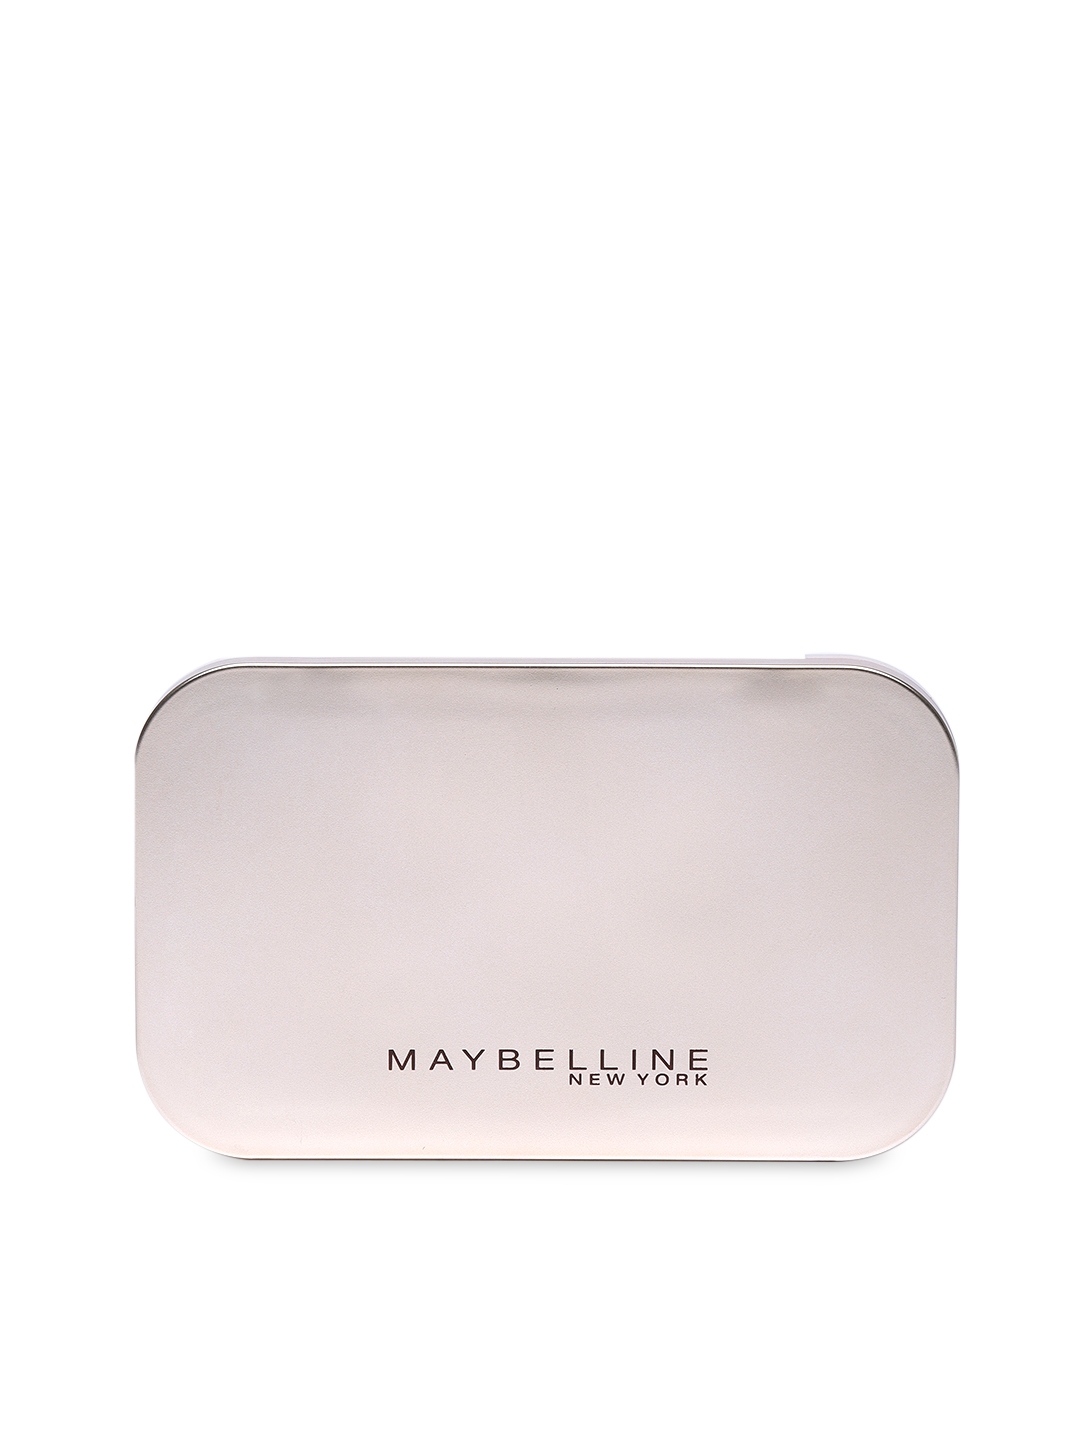 Phấn phủ Maybelline Clearsmooth All in One Two Way Cake Light